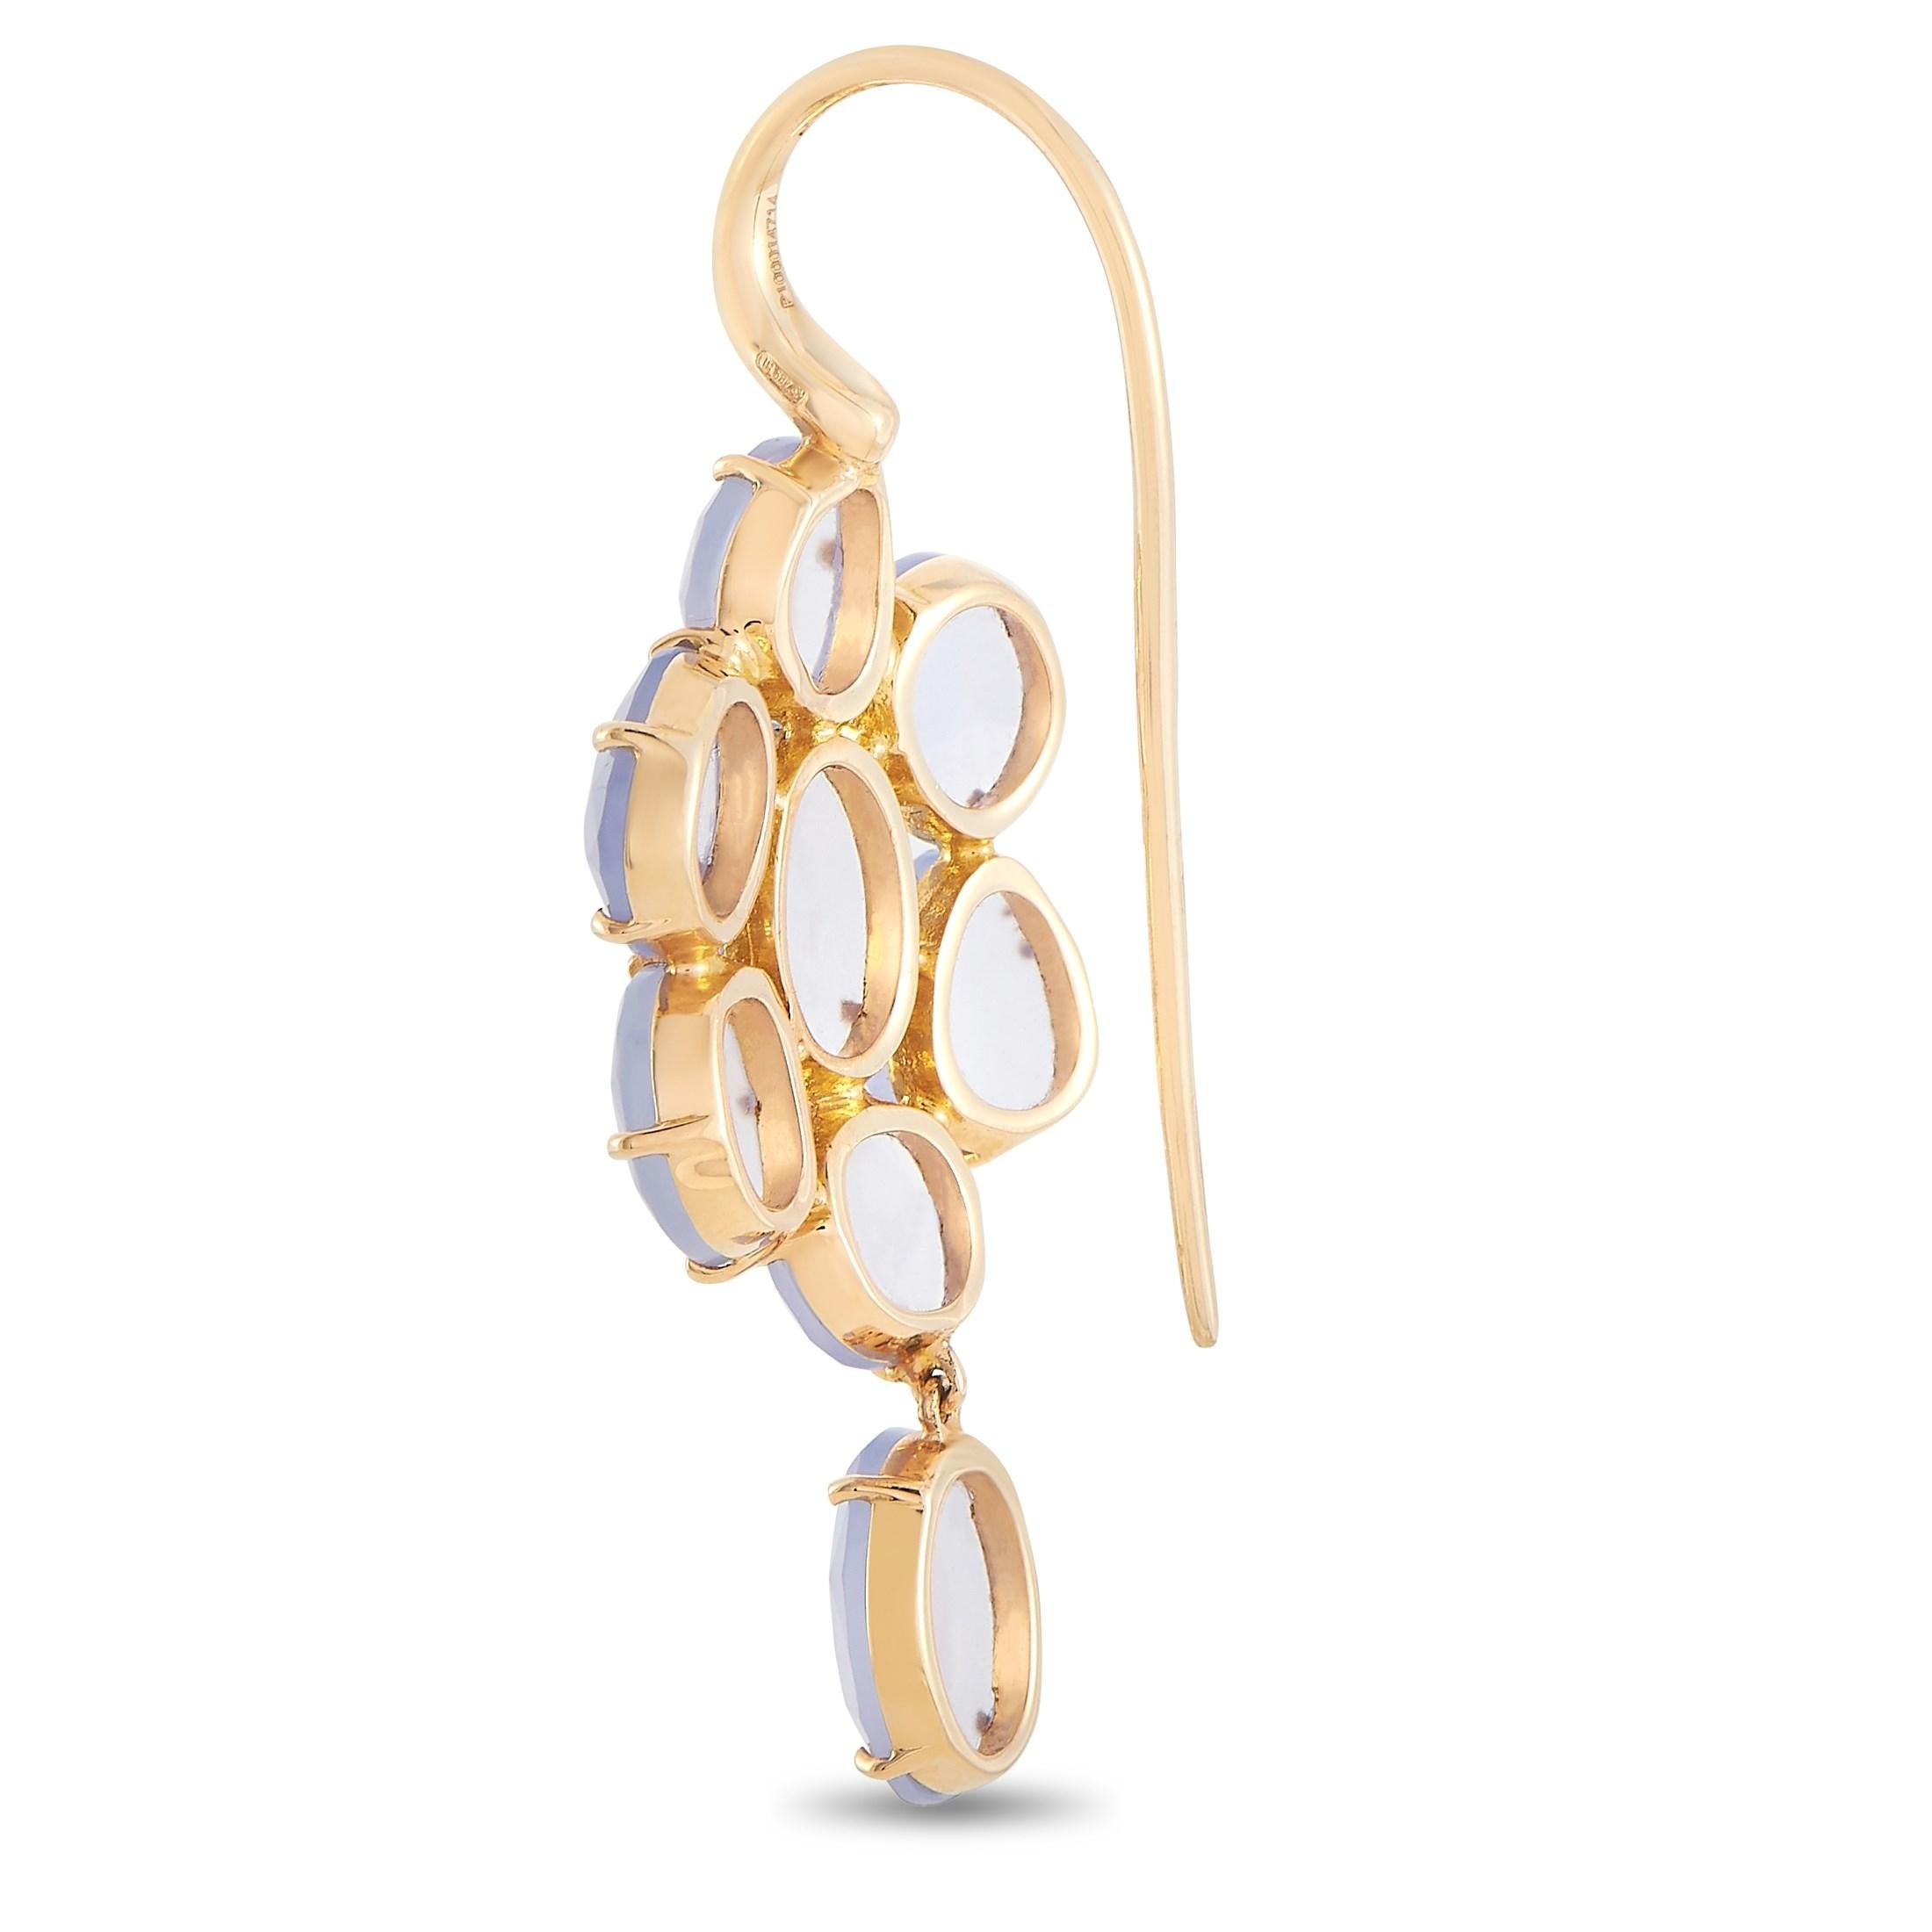 Prettify any outfit with this pair of Pomellato 18K Rose Gold Capri Chalcedony Dangling Earrings. Each earring features a French wire clasp connected to a slim frame that holds eight faceted chalcedony gemstones. The earrings are marked Pomellato